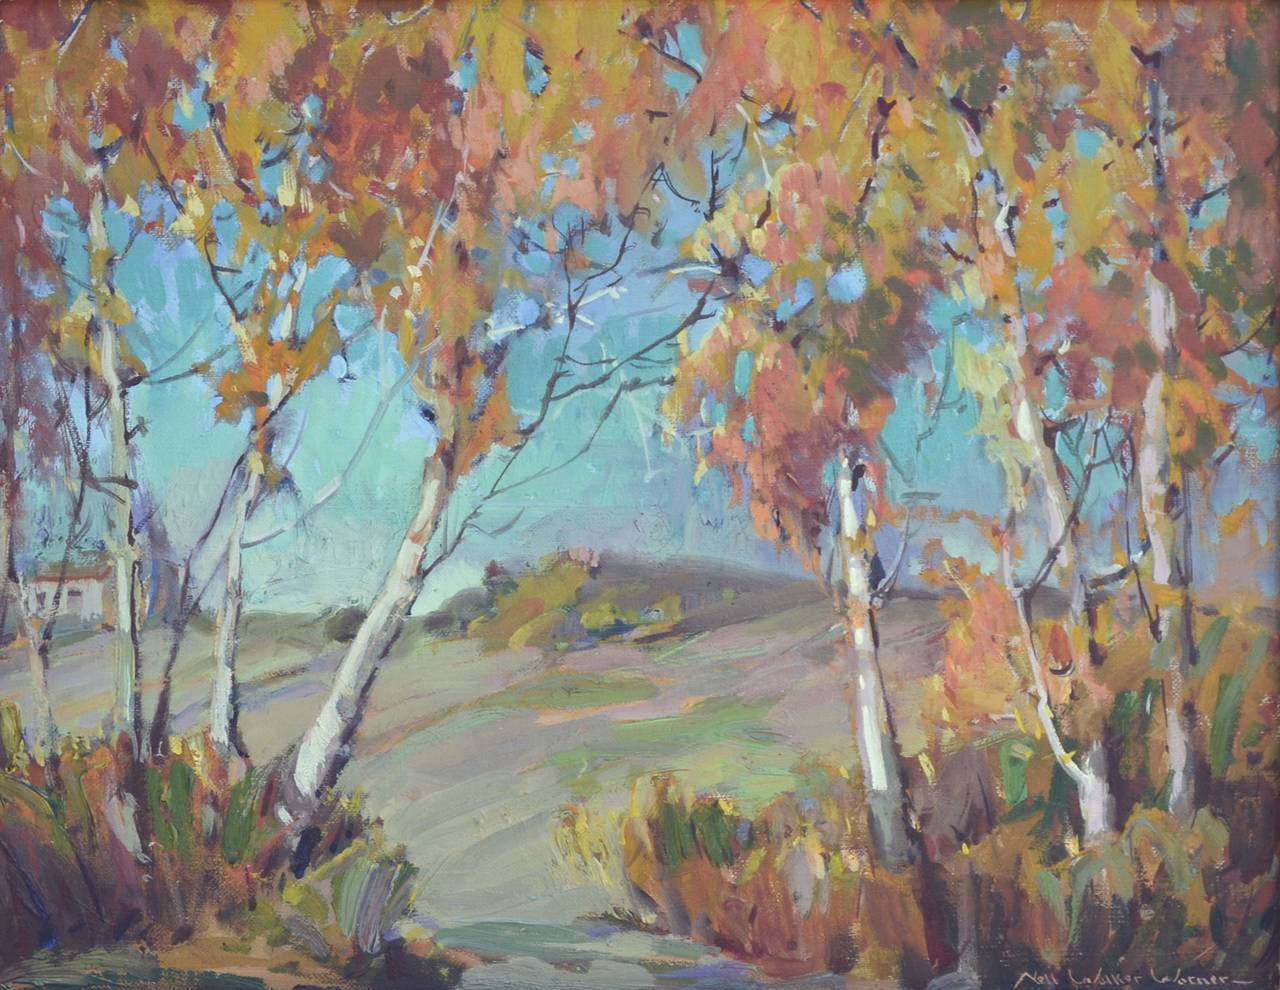 Mid Century Sycamore Canyon, Carmel Valley Landscape with Trees - Painting by Nell Walker Warner